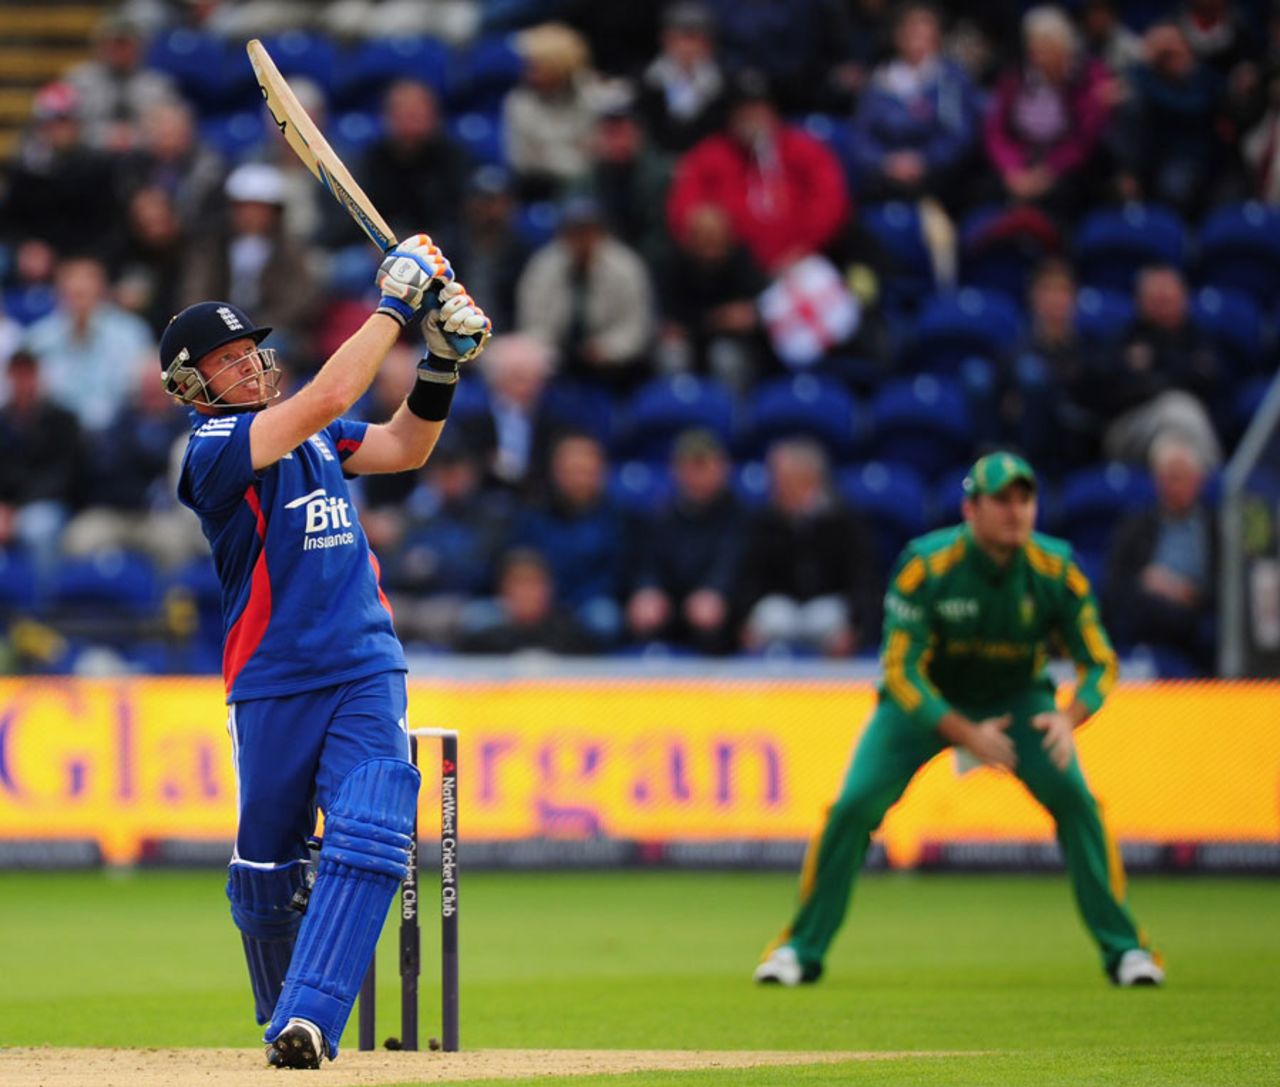 Ian Bell hit two sixes in his brief innings, England v South Africa, 1st NatWest ODI, Cardiff, August 24, 2012